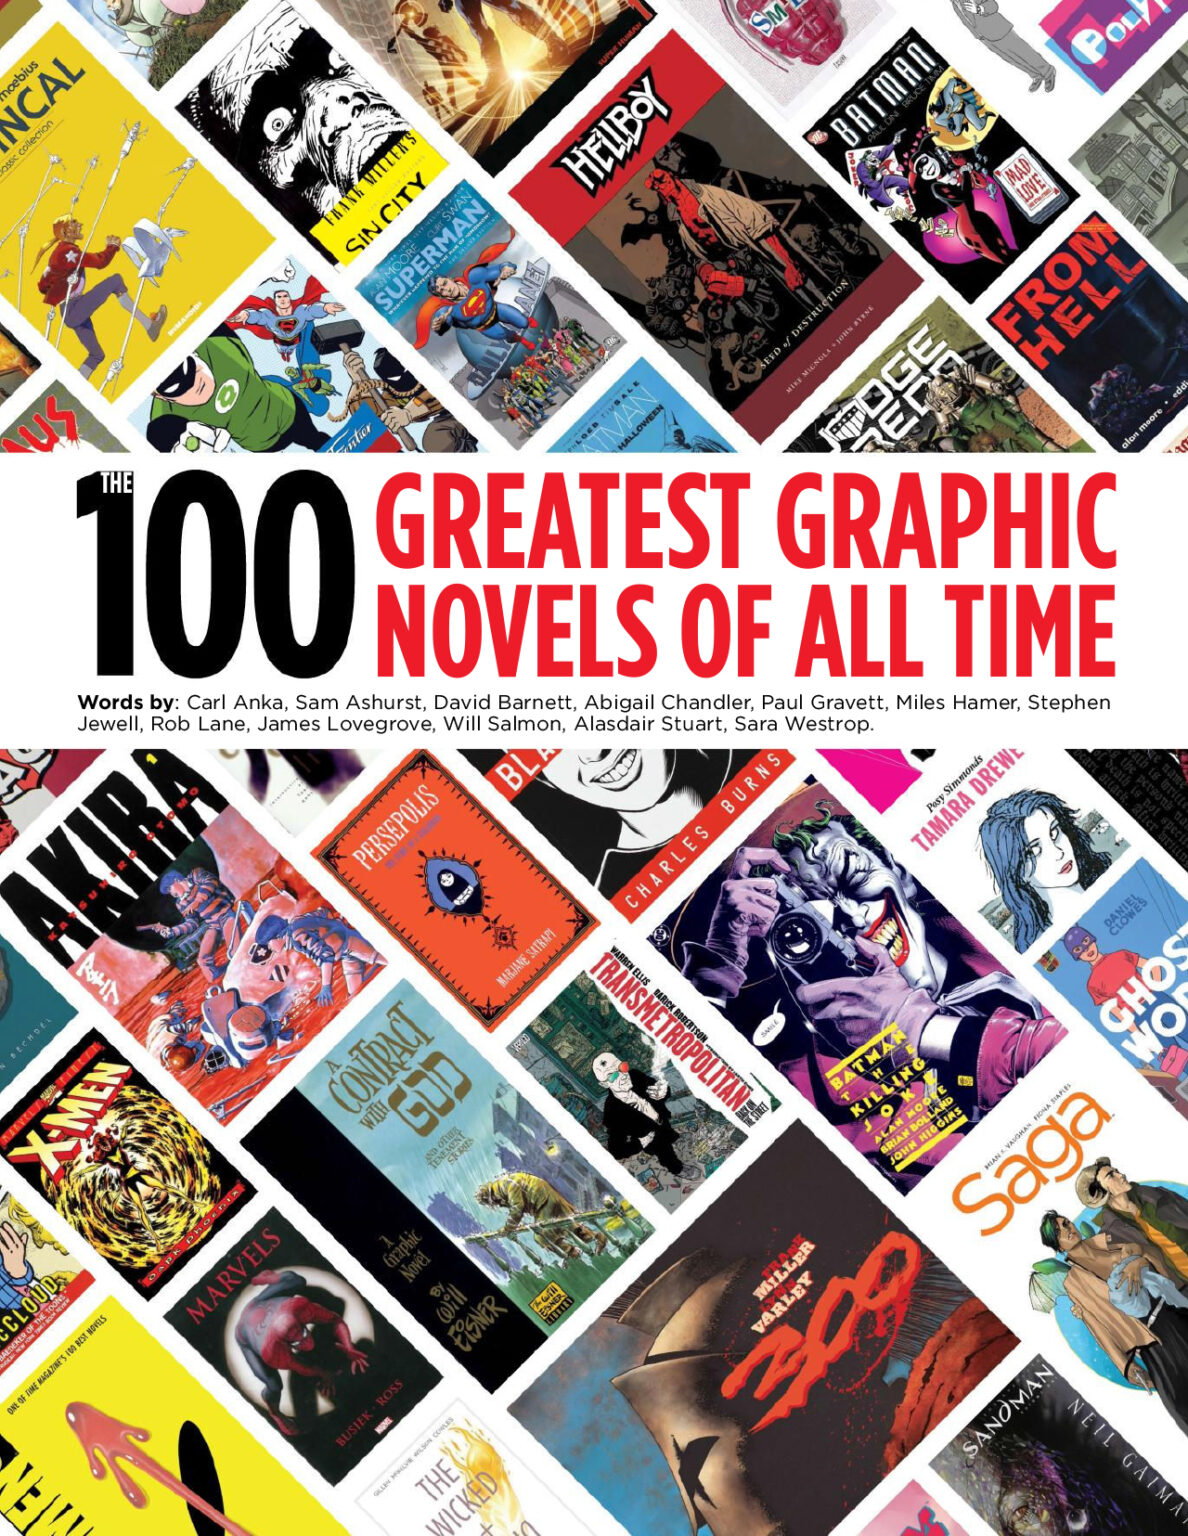 THE 100 GREATEST GRAPHIC NOVELS OF ALL TIME www.alpanthiya.lk